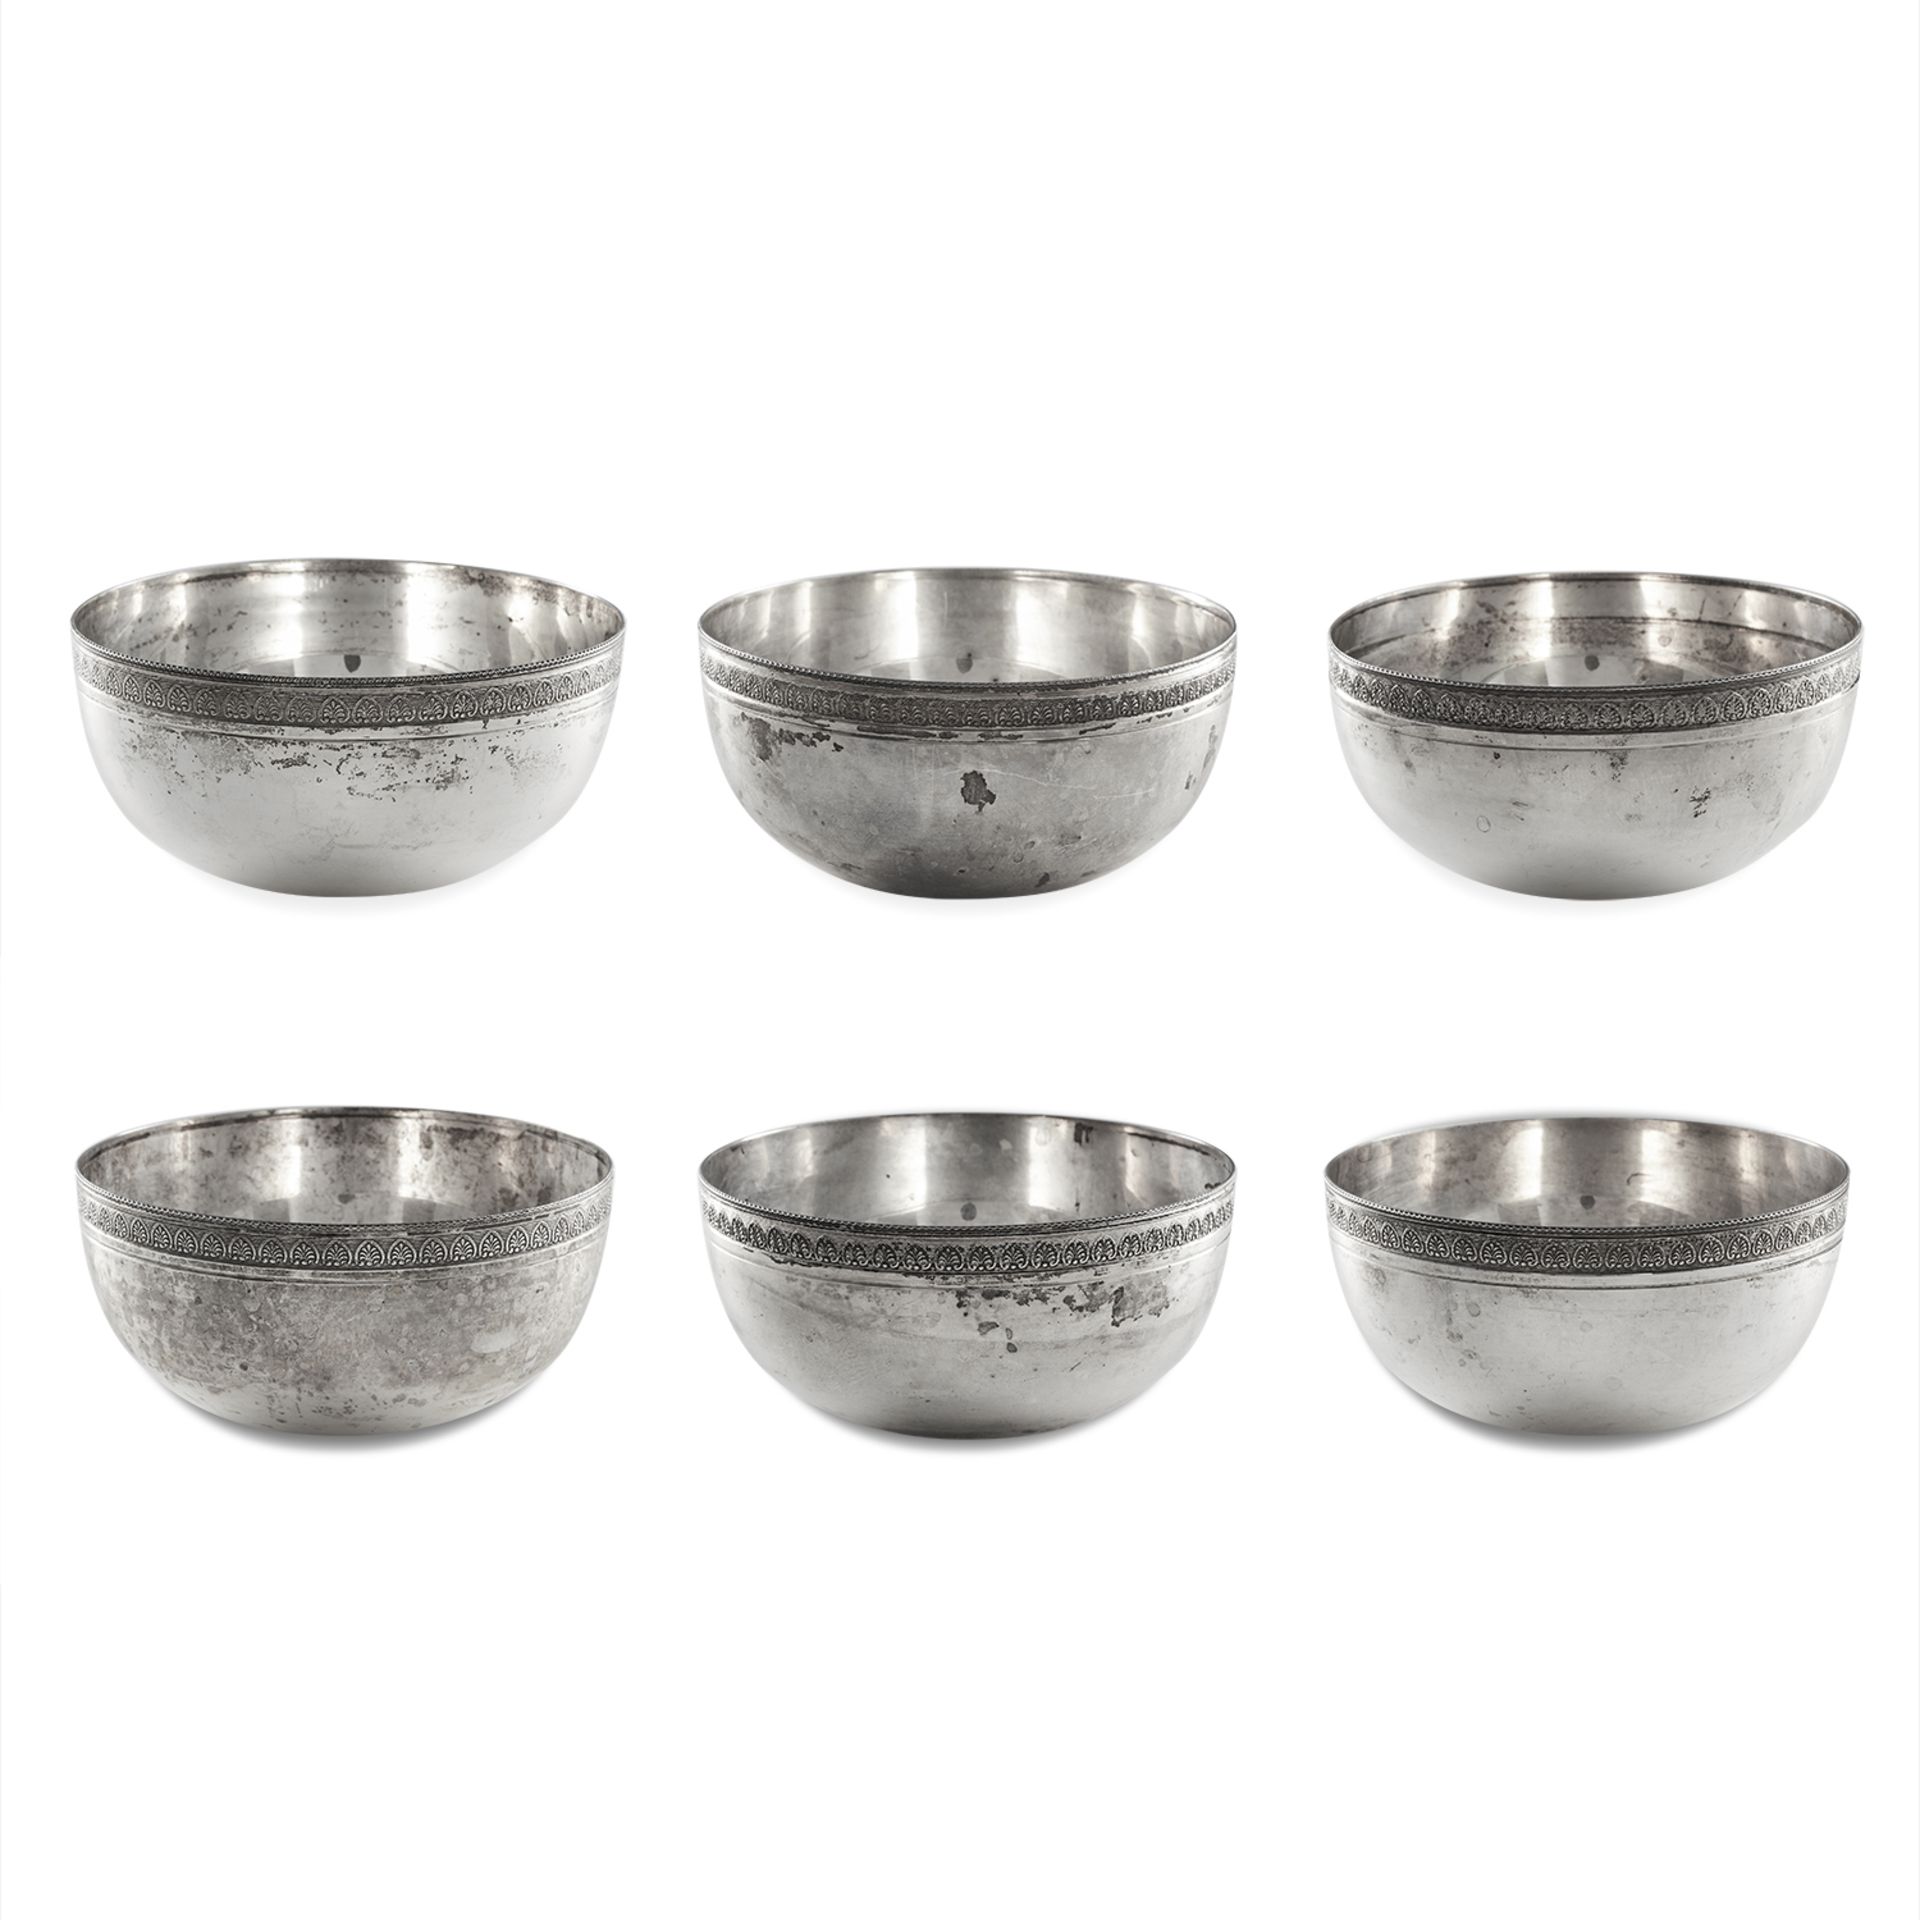 SET OF SIX LEBANESE SILVER BOWLS / DISHES each of circular design with a foliate border, 11.0cm,